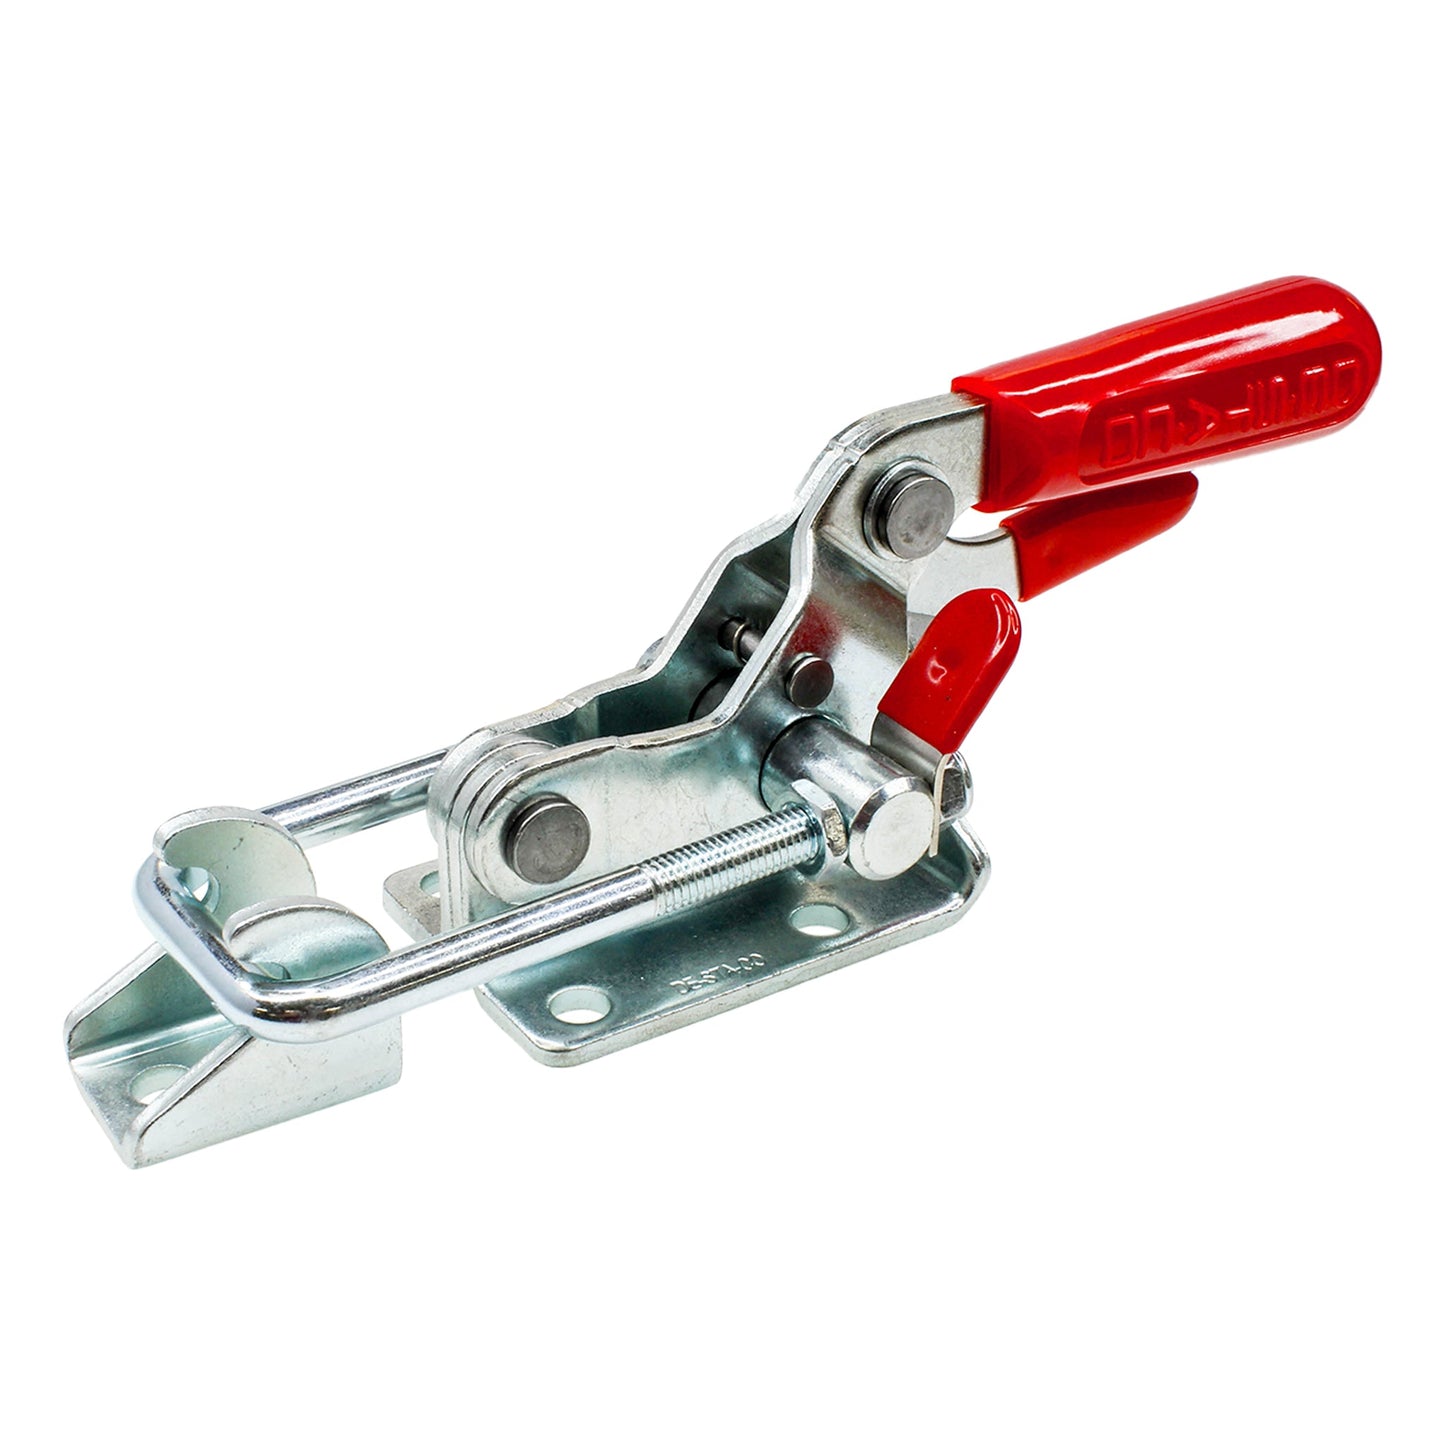 DESTACO 341-R PULL ACTION LATCH CLAMP WITH RELEASE LEVER